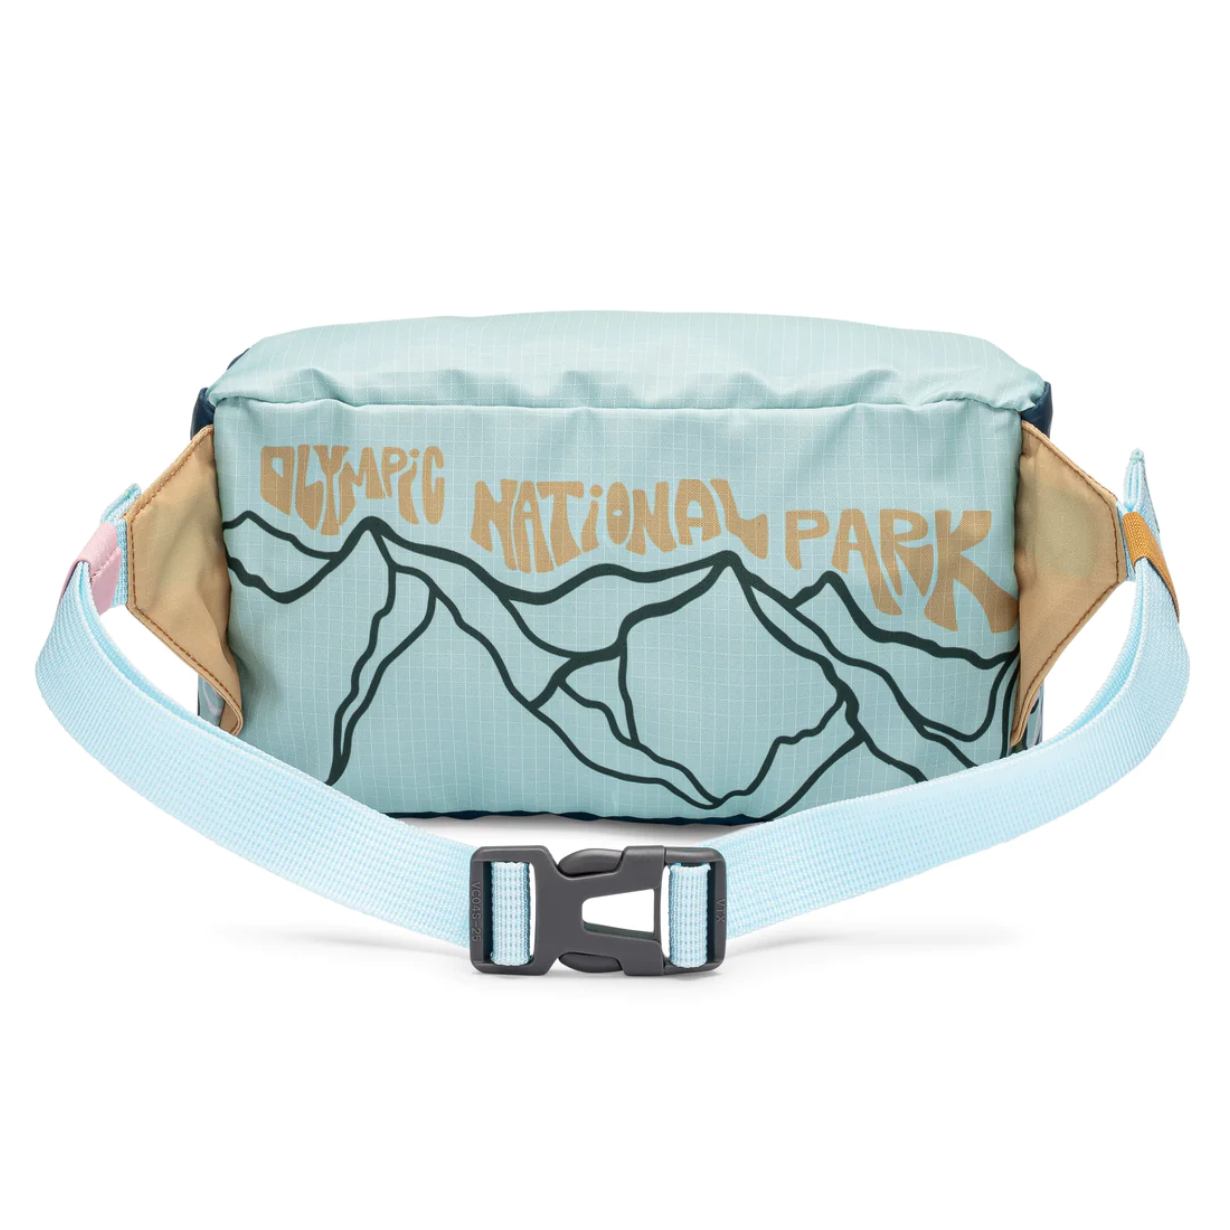 Olympic National Park Fanny Pack/Hip Pack